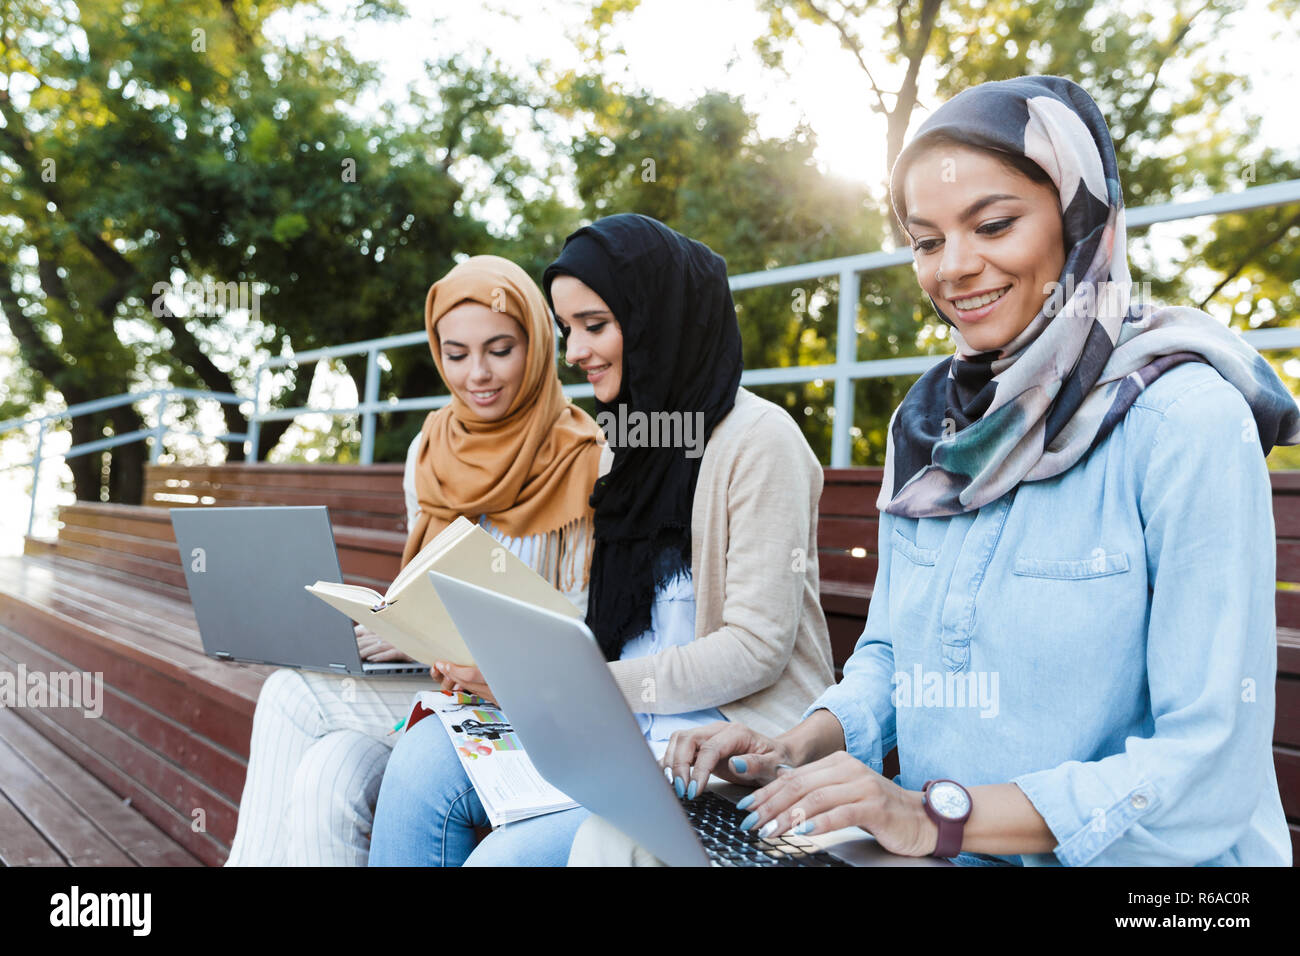 Photo of cheerful islamic women wearing headscarfs resting in green park and studying on laptop Stock Photo